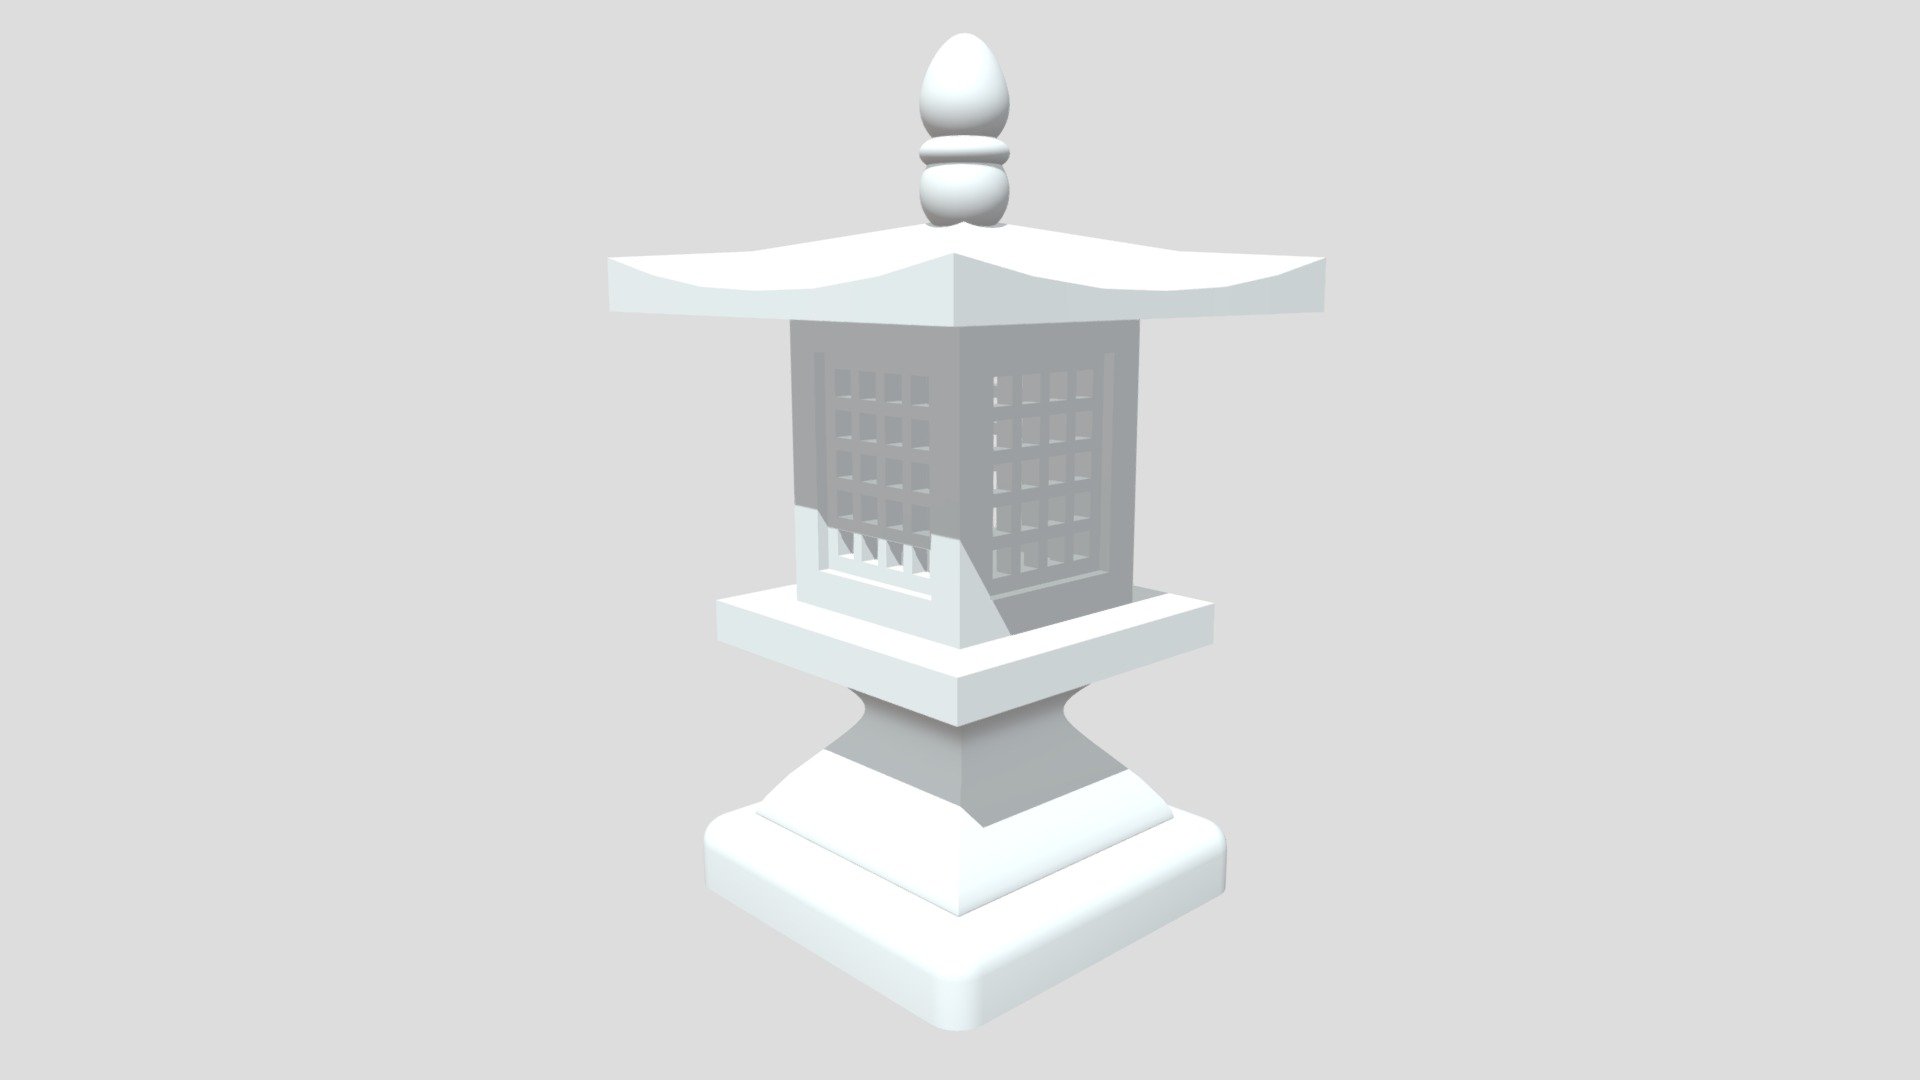 -Asian Stone Lantern.

-This product contains 1 object.

-Total vert: 4,474 , poly: 4,593.

-Materials and objects have the correct names.

-This product was created in Blender 3.0.

-Formats: blend, fbx, obj, c4d, dae, abc, stl, glb, unity.

-We hope you enjoy this model.

-Thank you 3d model